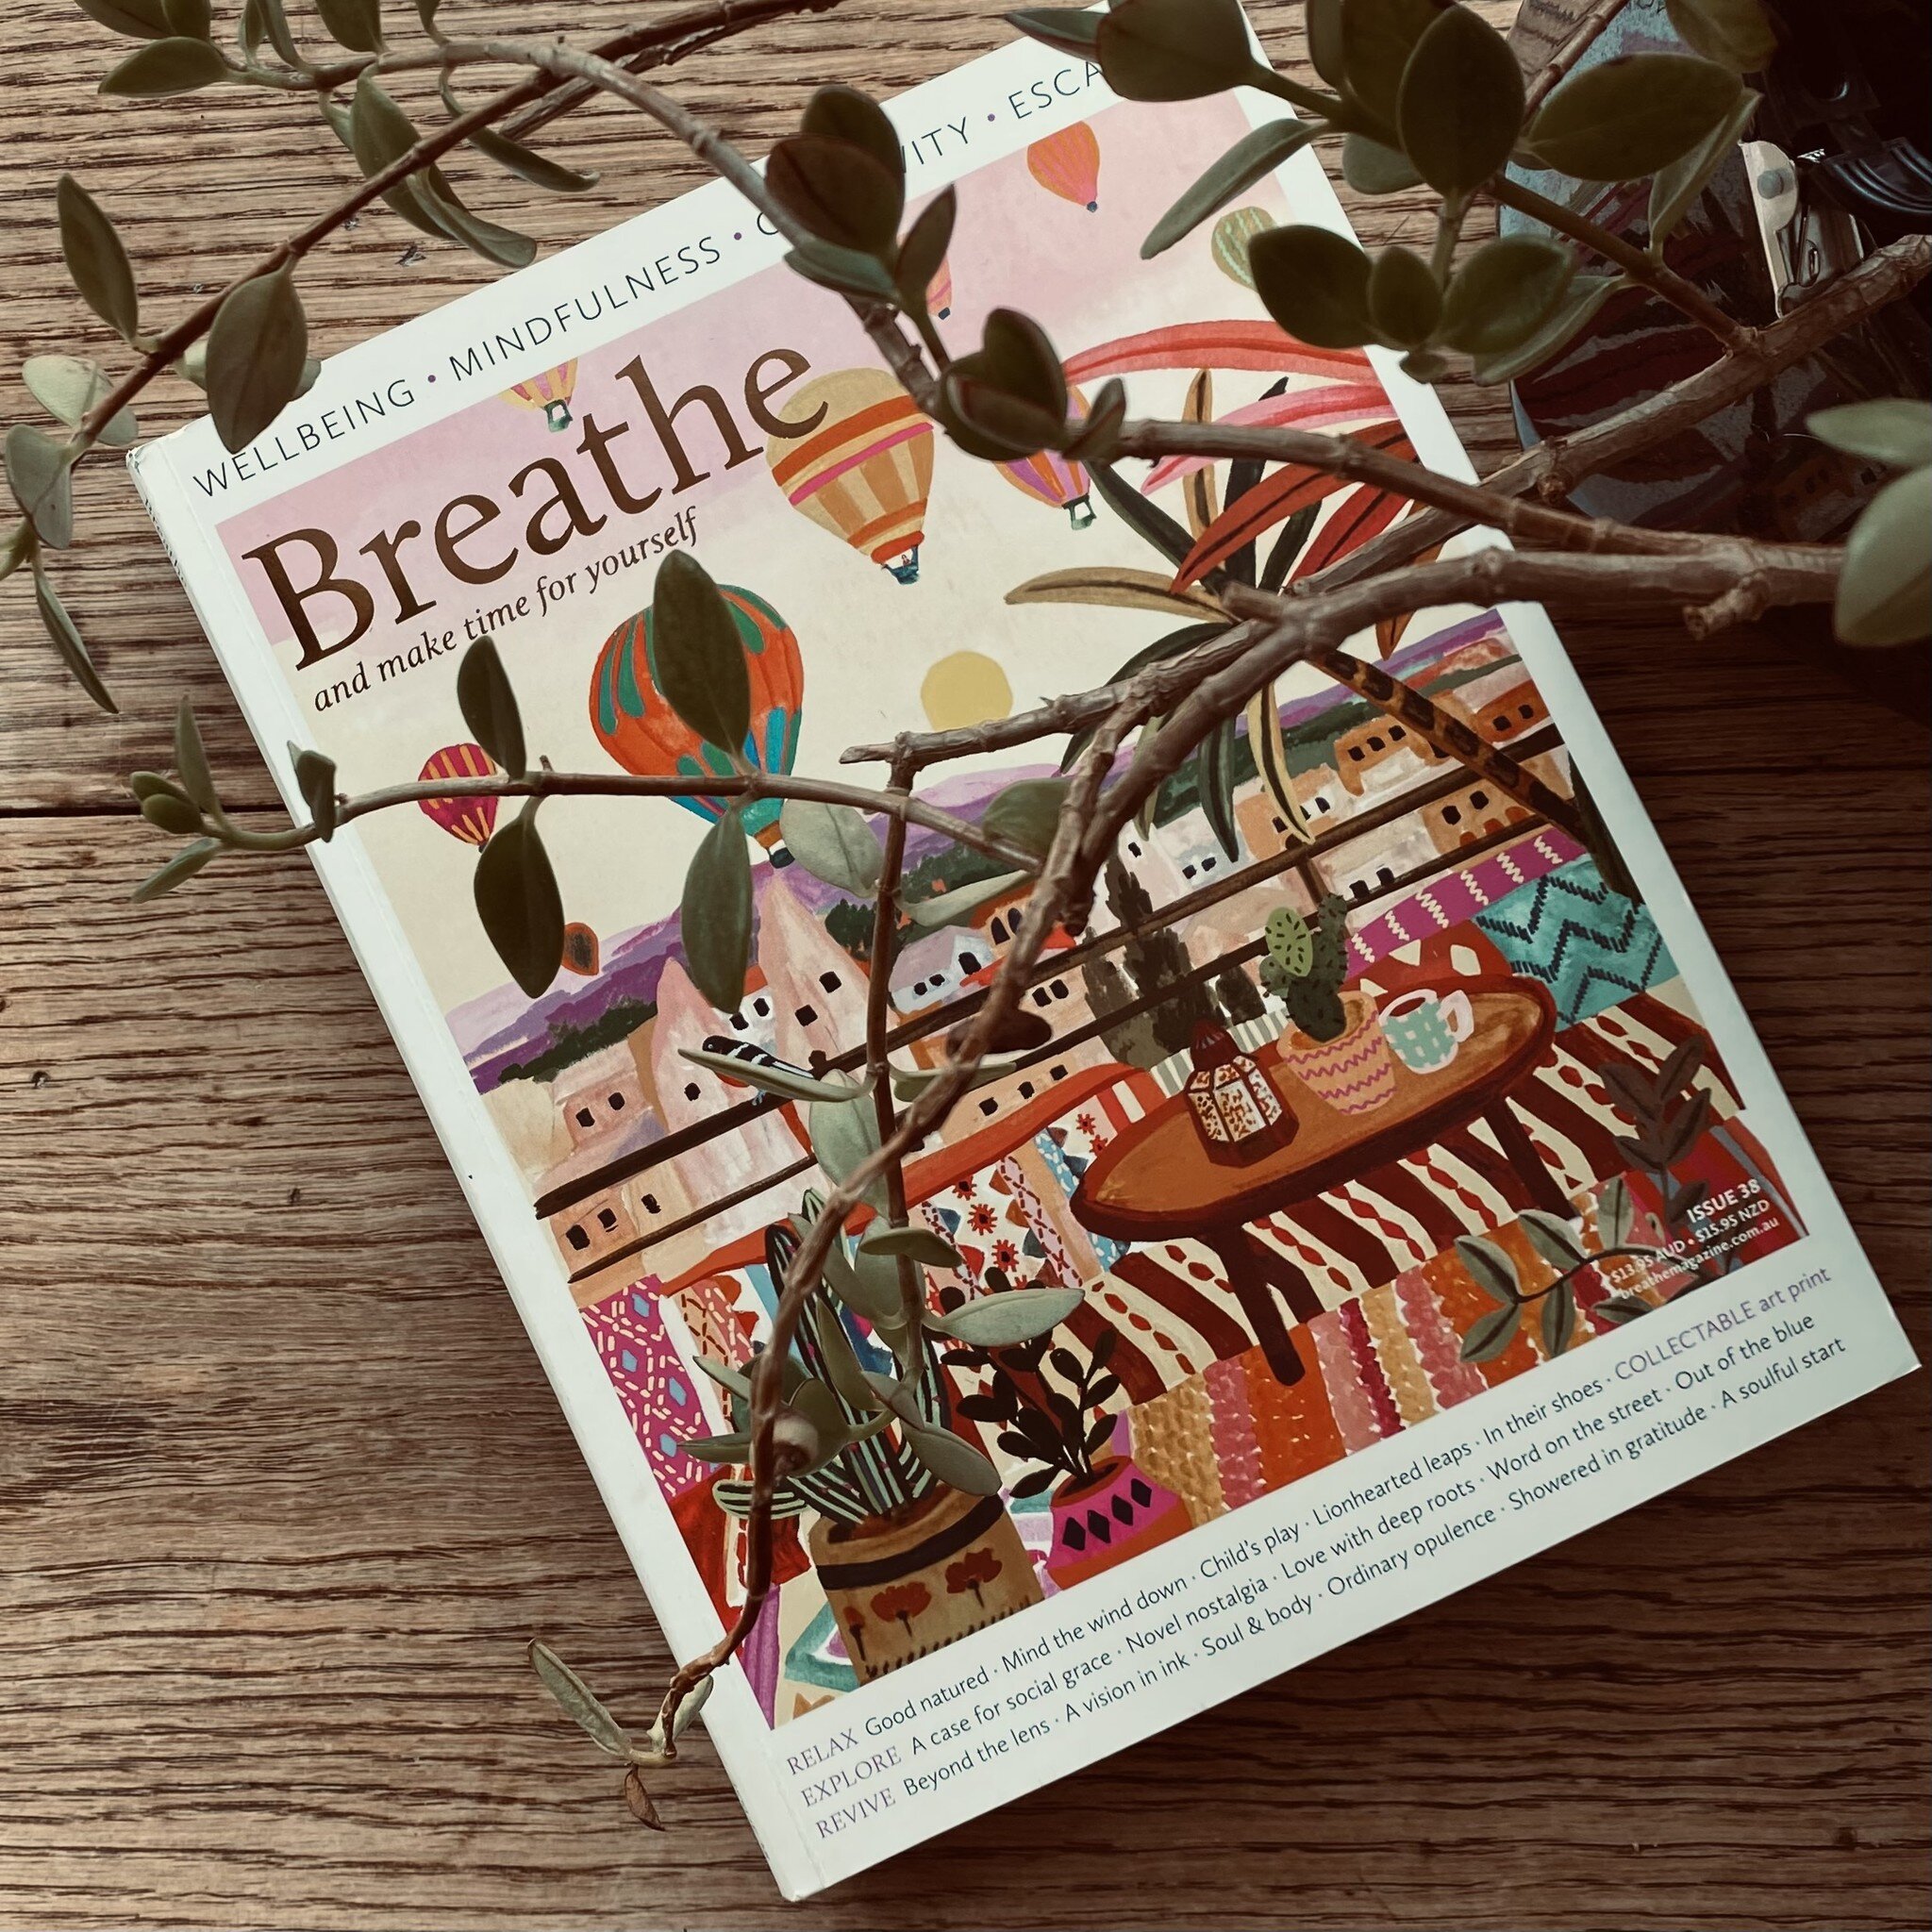 Sit back, relax, and let the pages transport you to a world of relaxation and inspiration. Beautiful new reads @breathemagazine_australia  in the salon @brookesachi 🌻